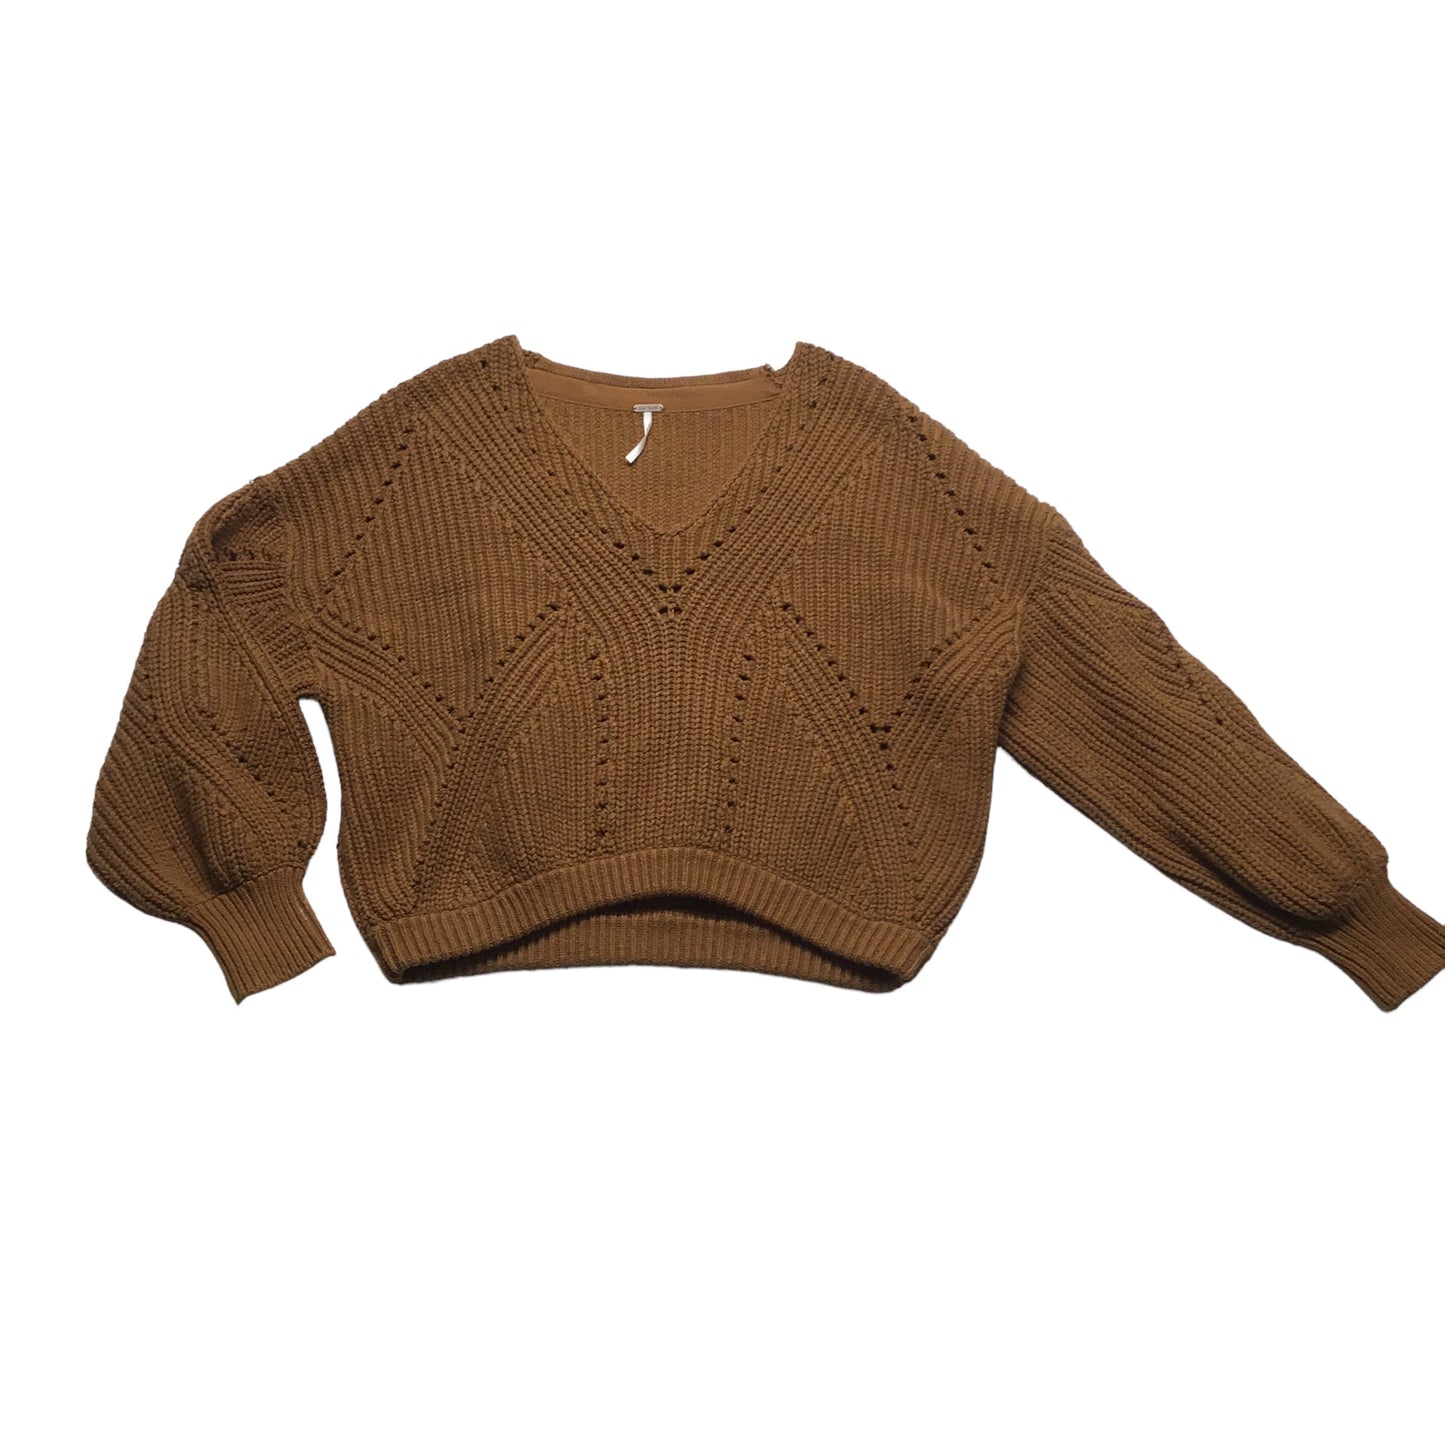 Brown Sweater Free People, Size S